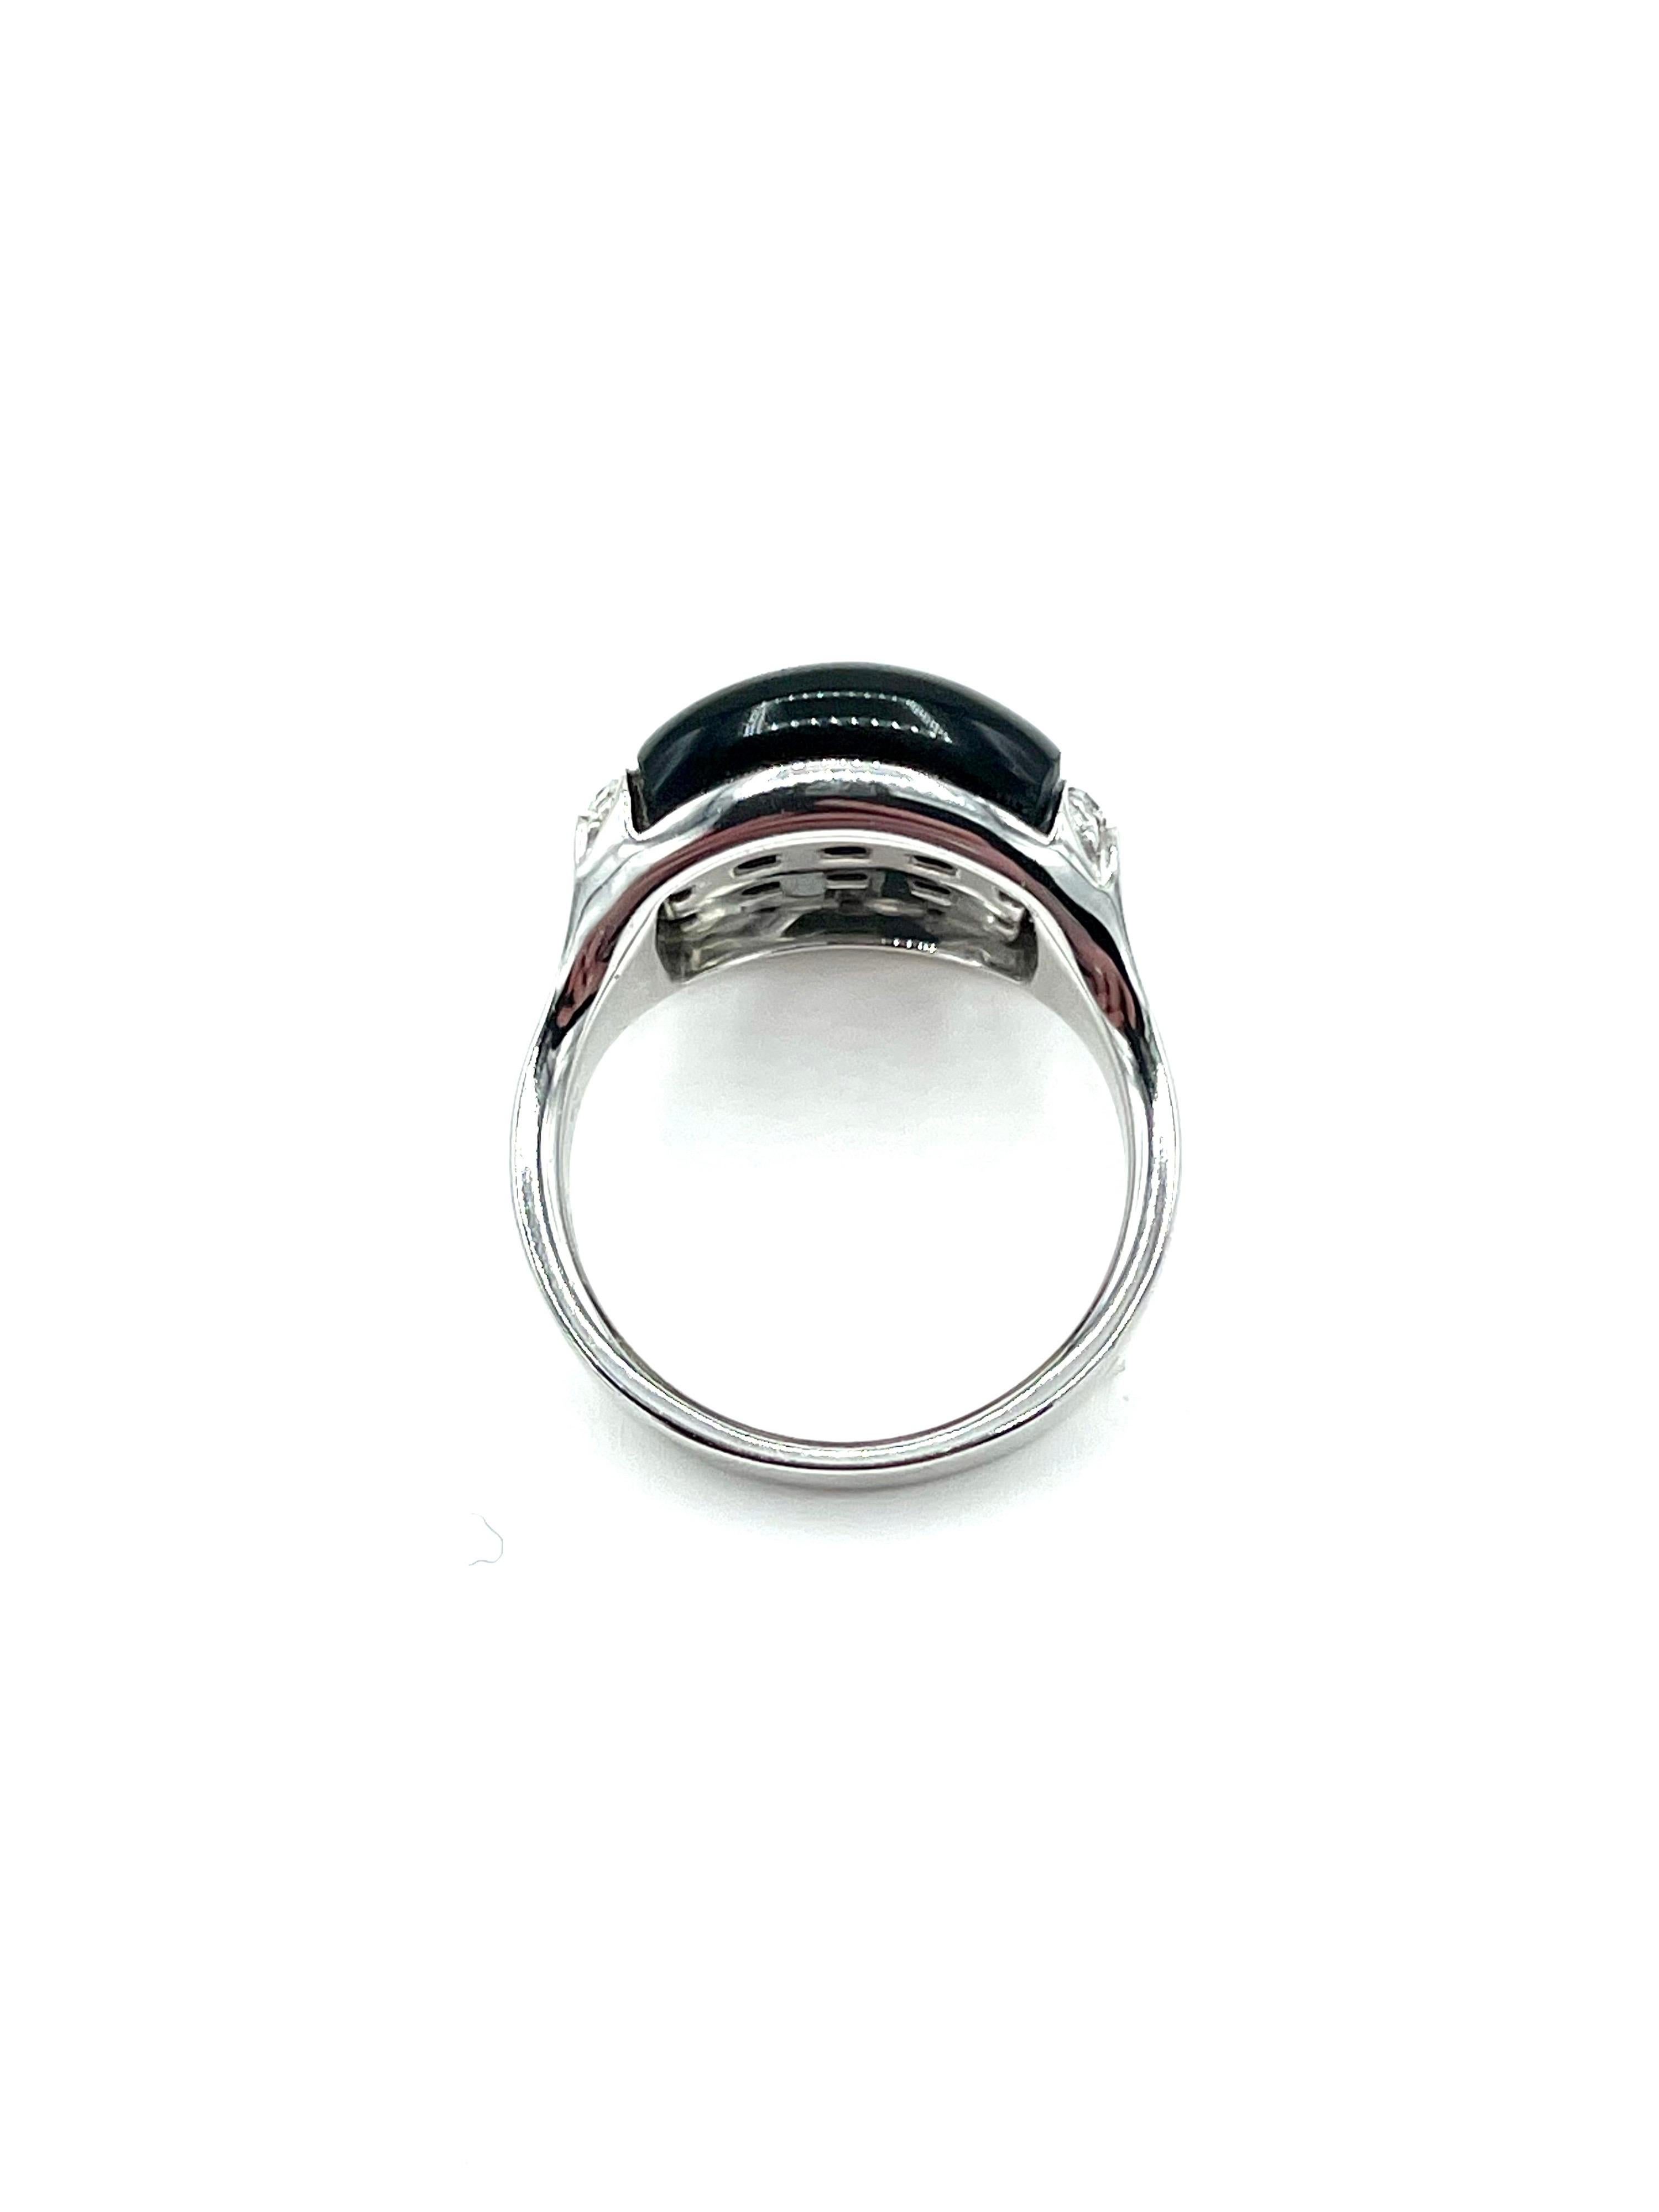 Chimento Cabochon Cut Onyx and Diamond White Gold Fashion Ring In Excellent Condition For Sale In Chevy Chase, MD